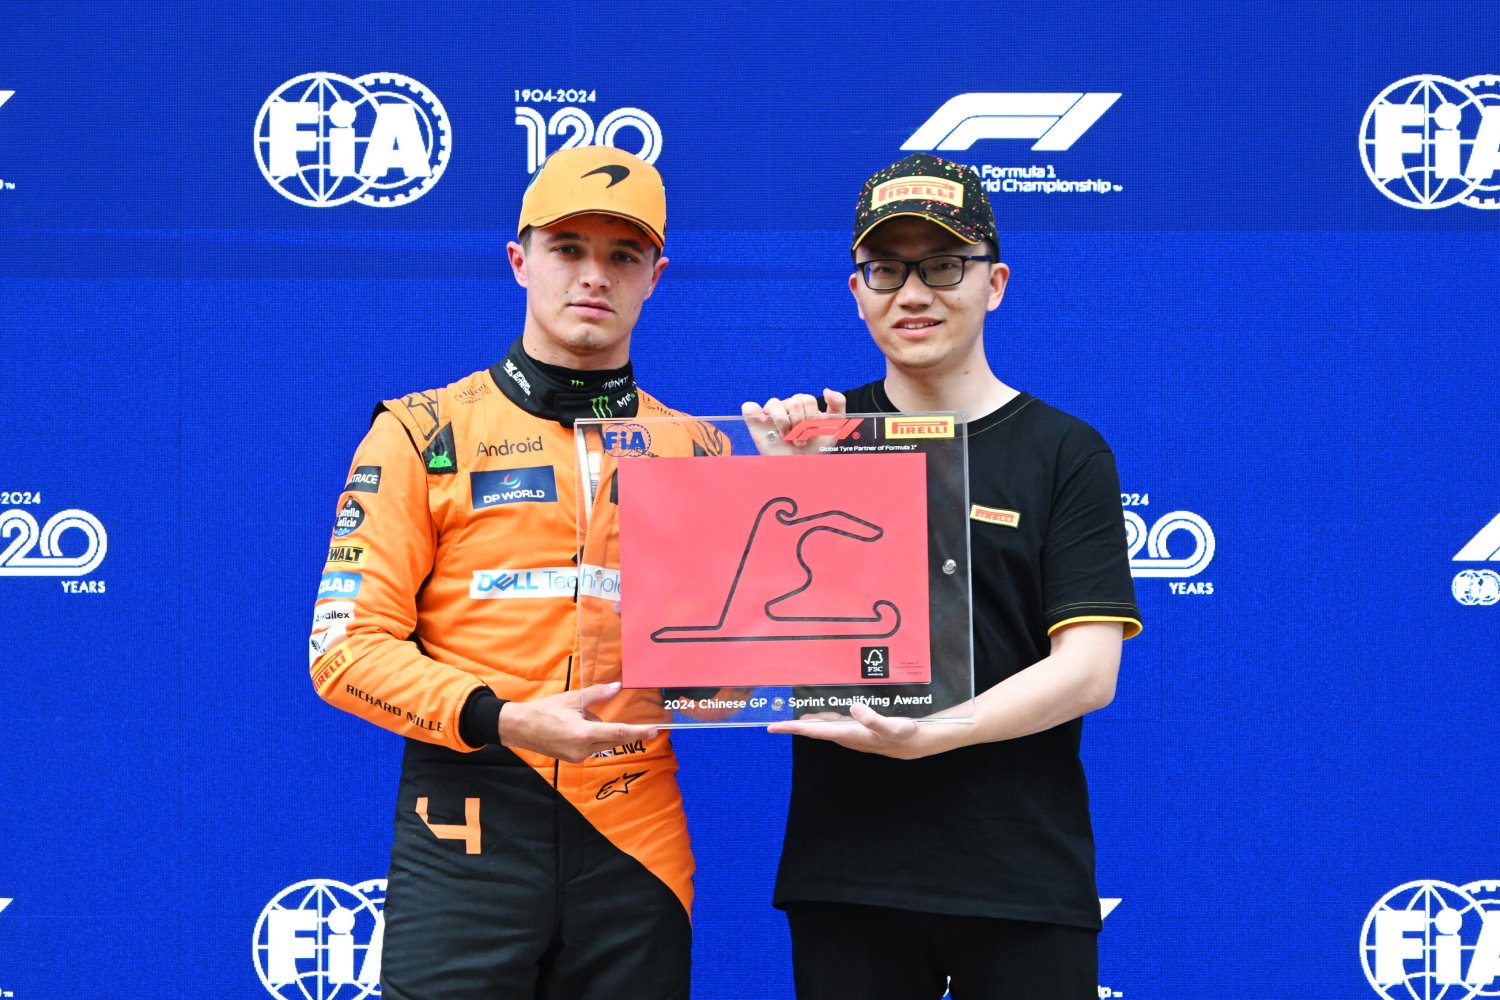 Lando Norris, McLaren F1 Team, receives his Pirelli Sprint Qualifying Award during the Chinese GP at Shanghai International Circuit on Friday April 19, 2024 in Shanghai, China. (Photo by Mark Sutton / LAT Images for Pirelli)